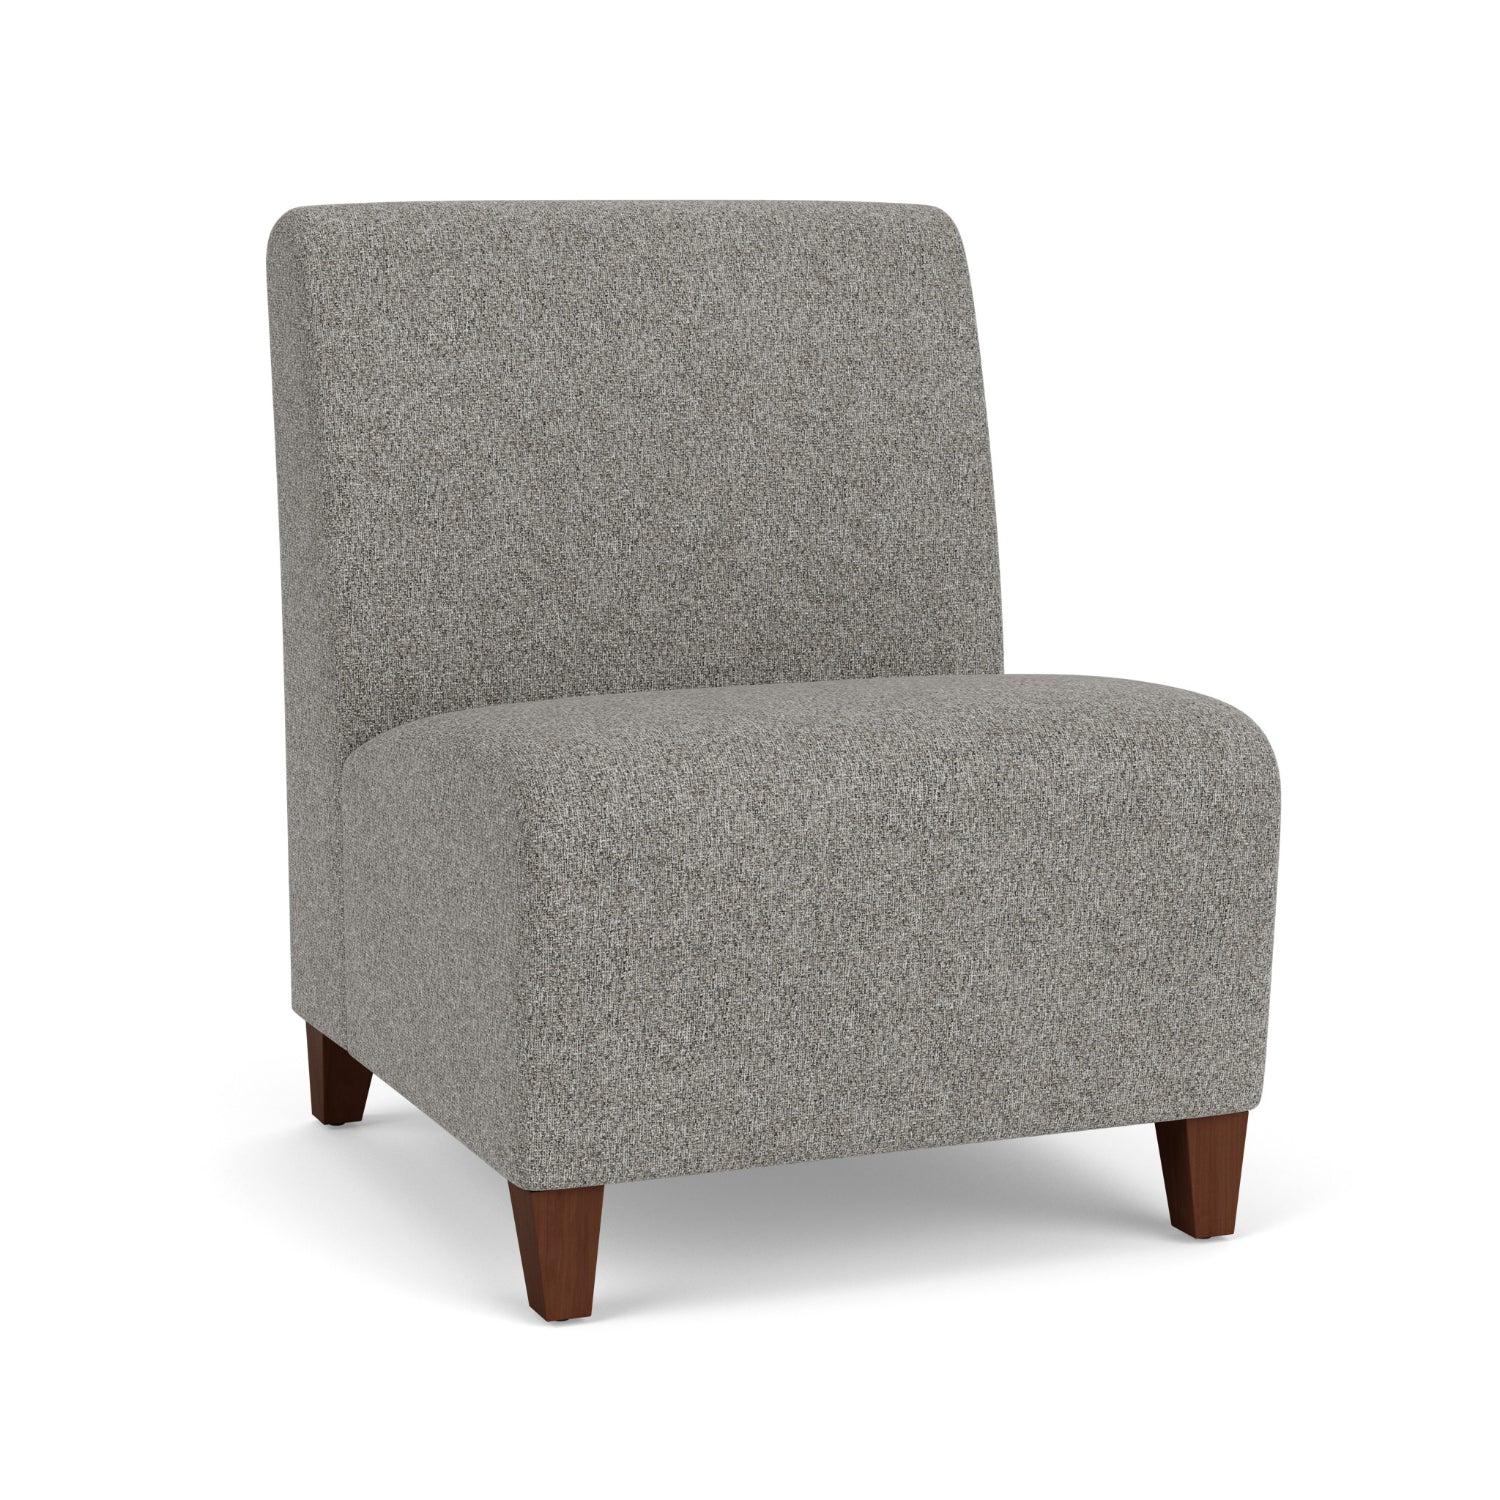 Siena Collection Reception Seating, Armless Oversize Guest Chair, 500 lb. Capacity, Standard Fabric Upholstery, FREE SHIPPING